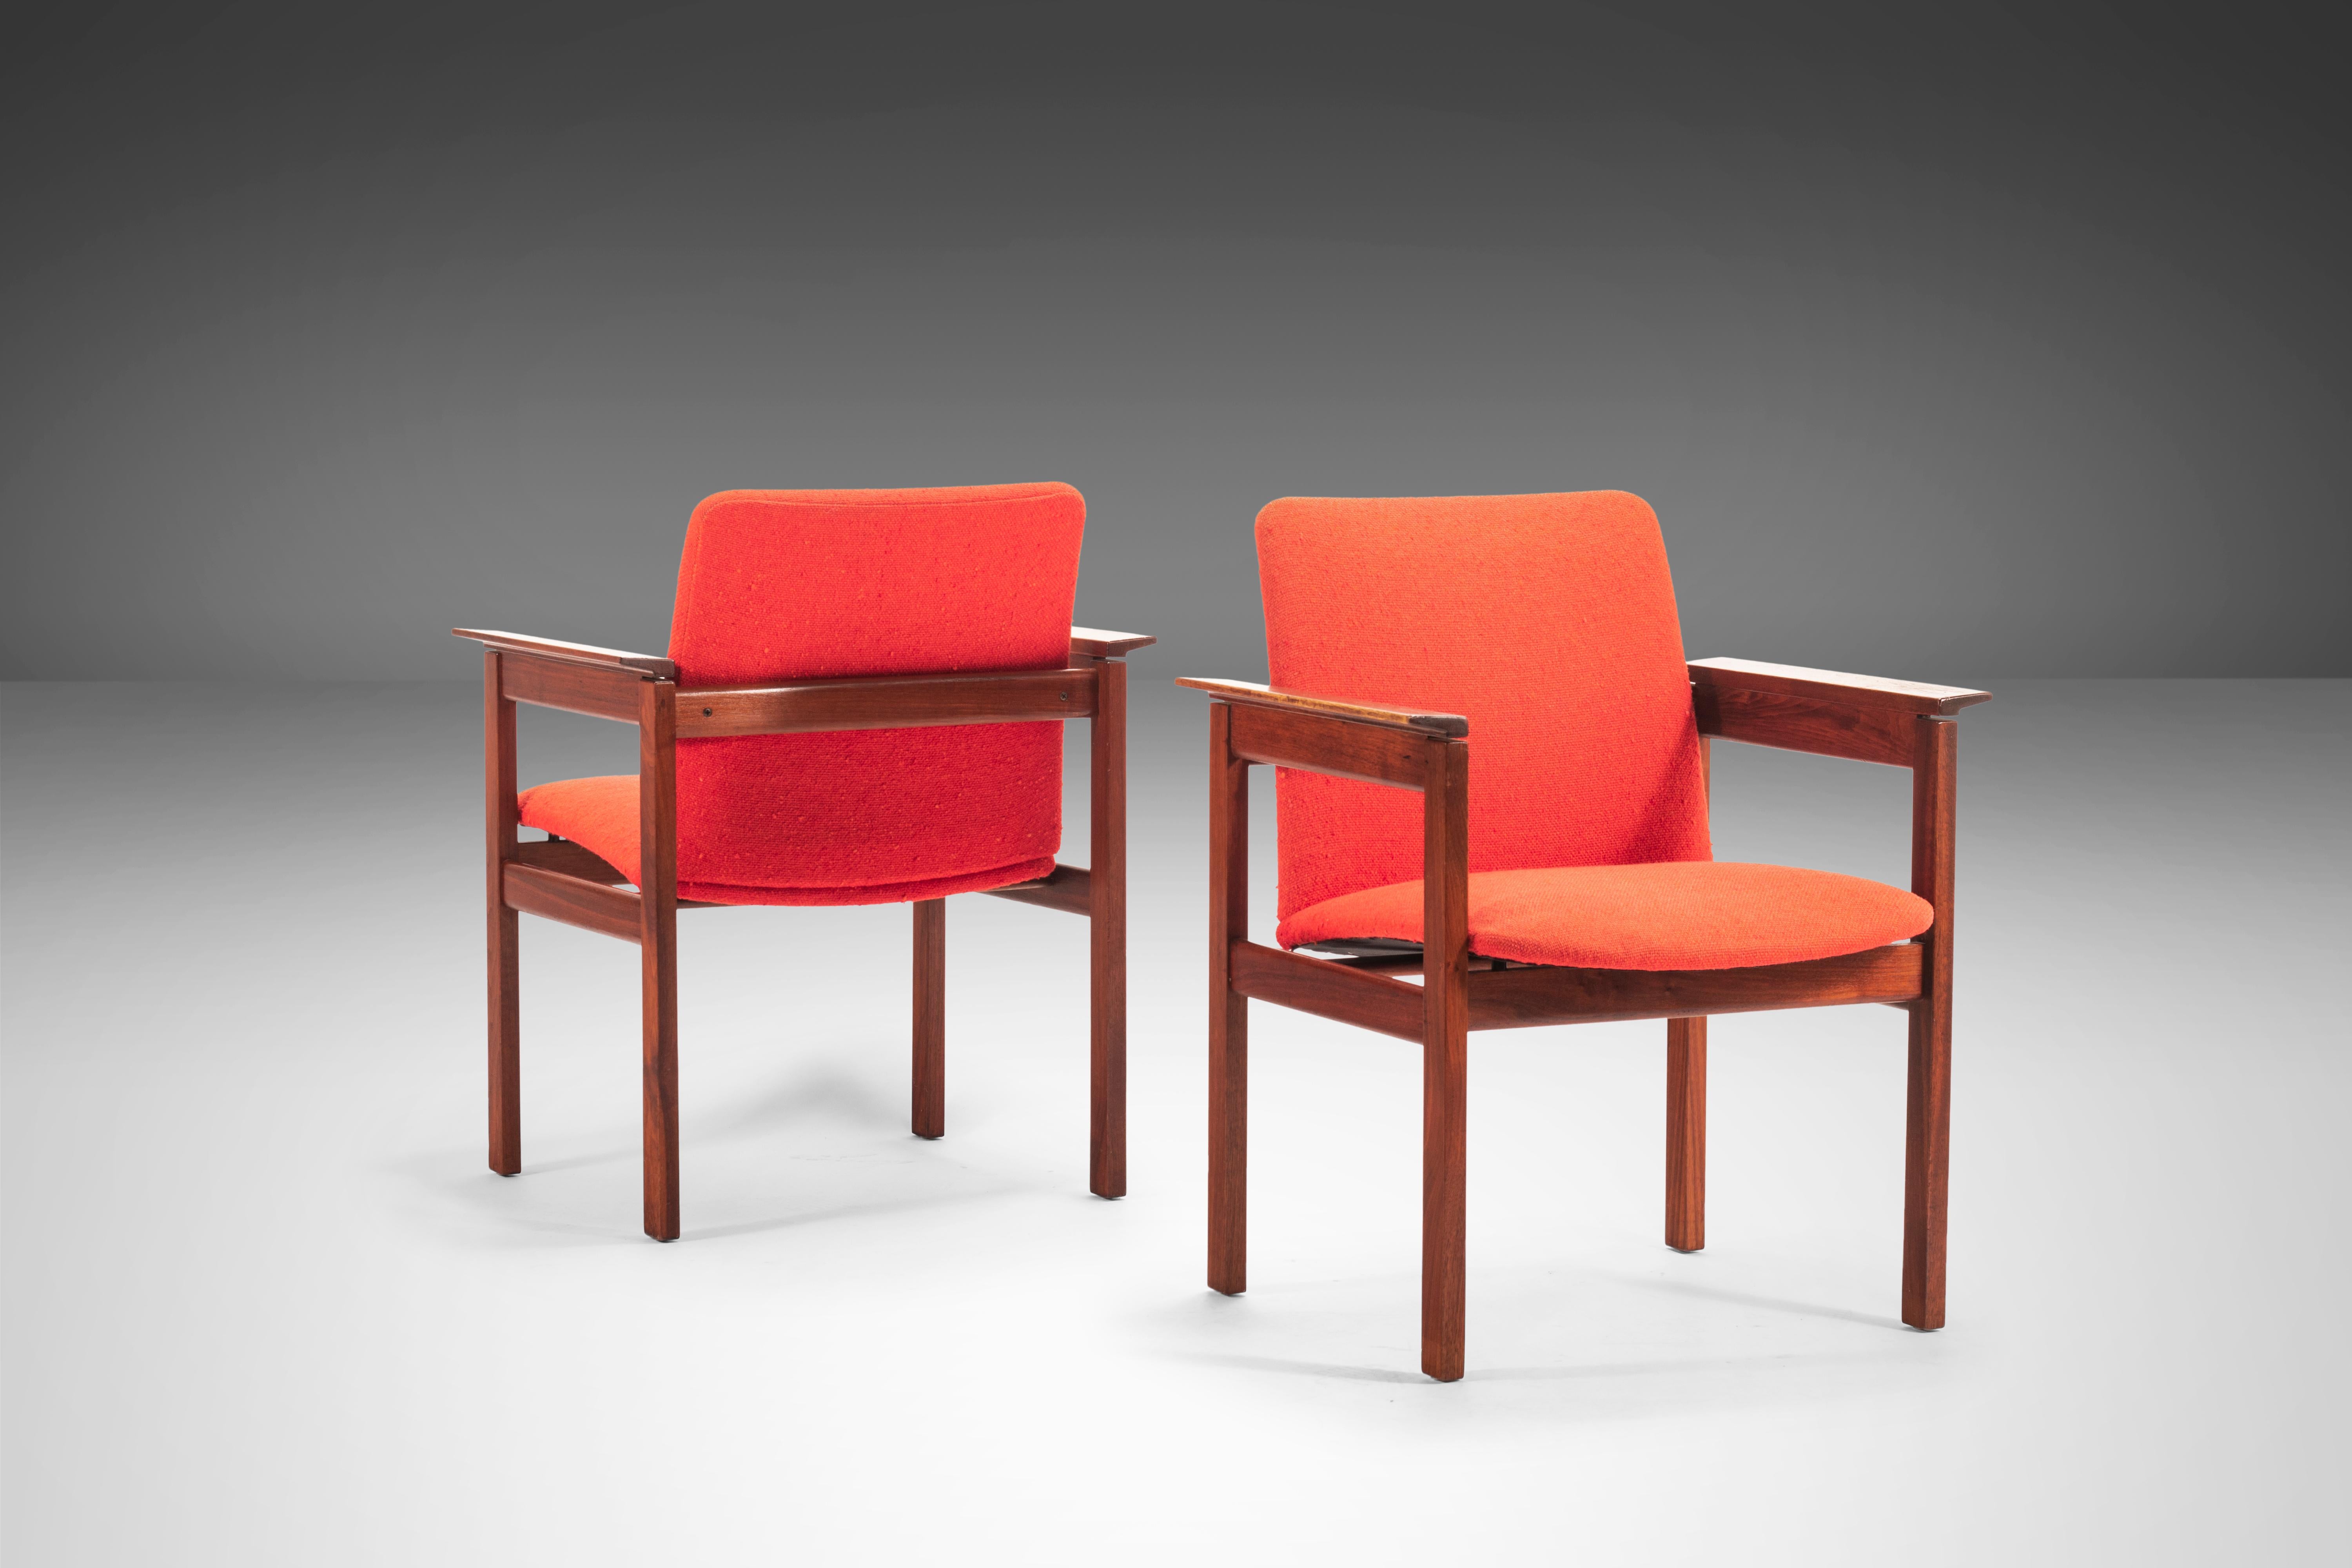 This set of chairs is for the collector with exceptional taste, as it is one of the more profound designs by Jens Risom. Upholstered in original red knit fabric. Constructed on a solid walnut frame; truly exceptional lines and sculpted armrests.